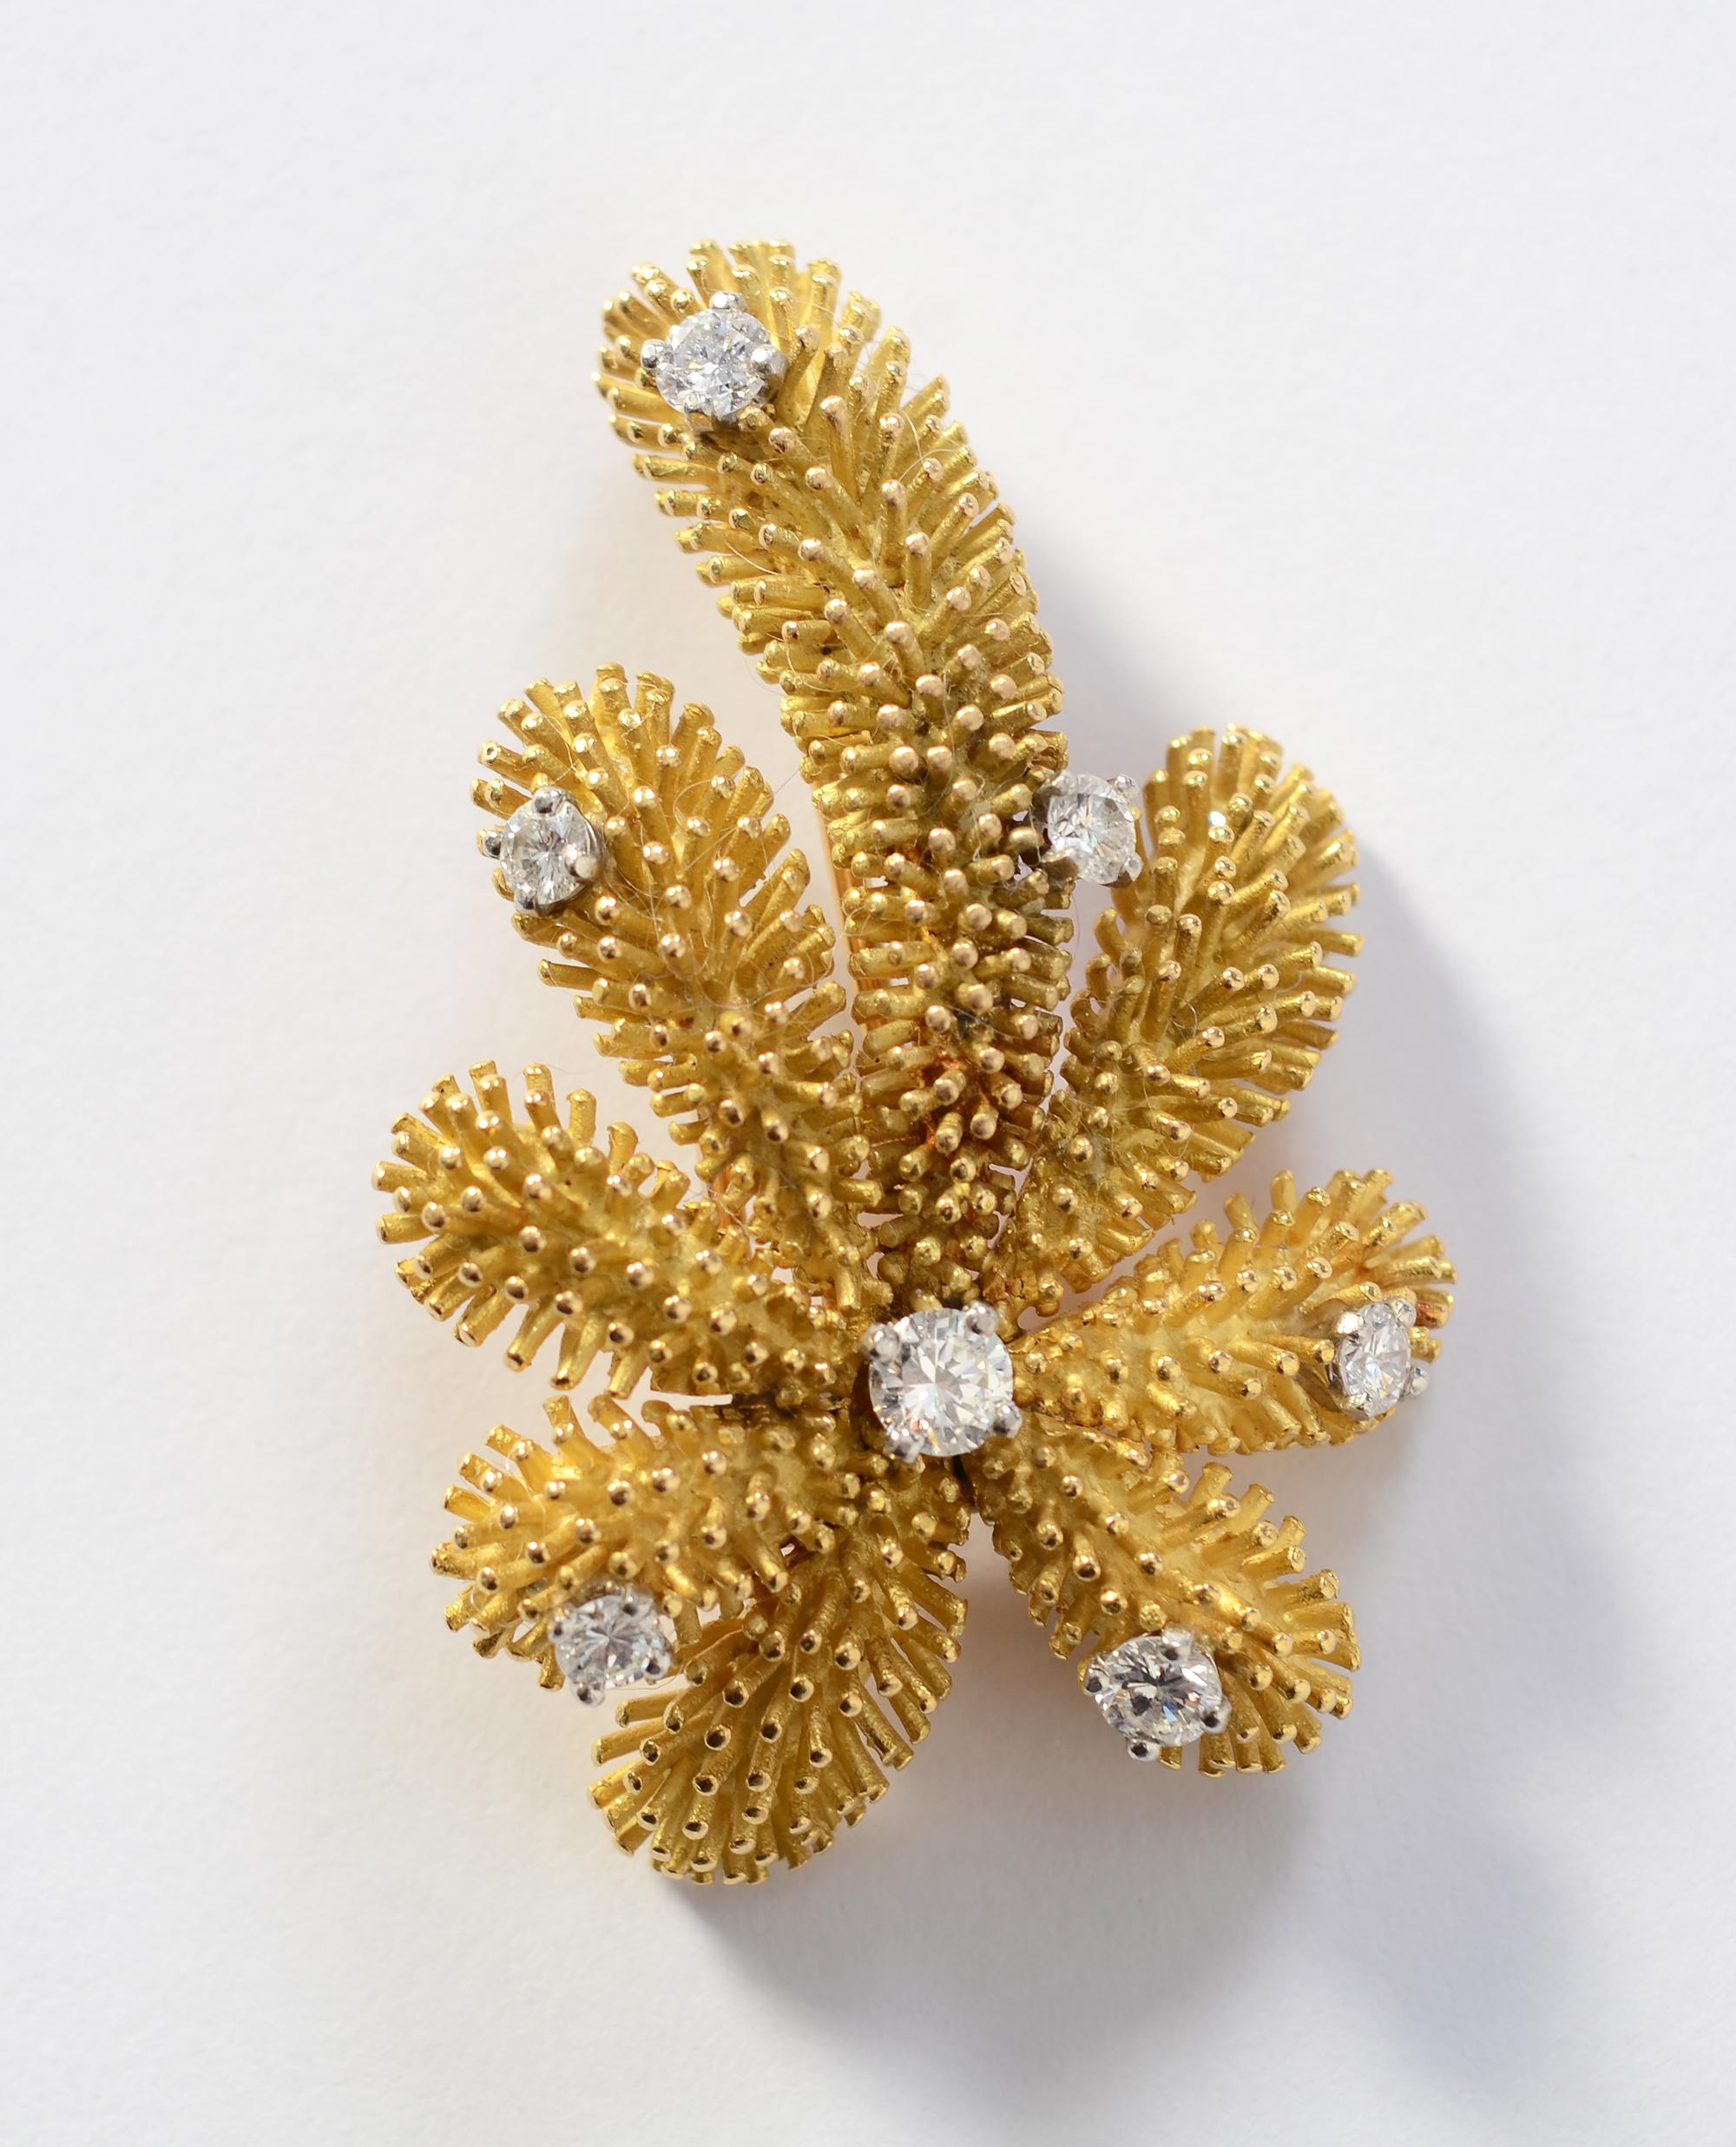 Missing a warm weather vacation this year? This Palm Tree brooch by Tiffany will bring back fond memories.
The brooch has a detailed sea urchin texture.  Seven prong set diamonds weigh a total of approximately 1 carat. The stones are H-I color; SI 1